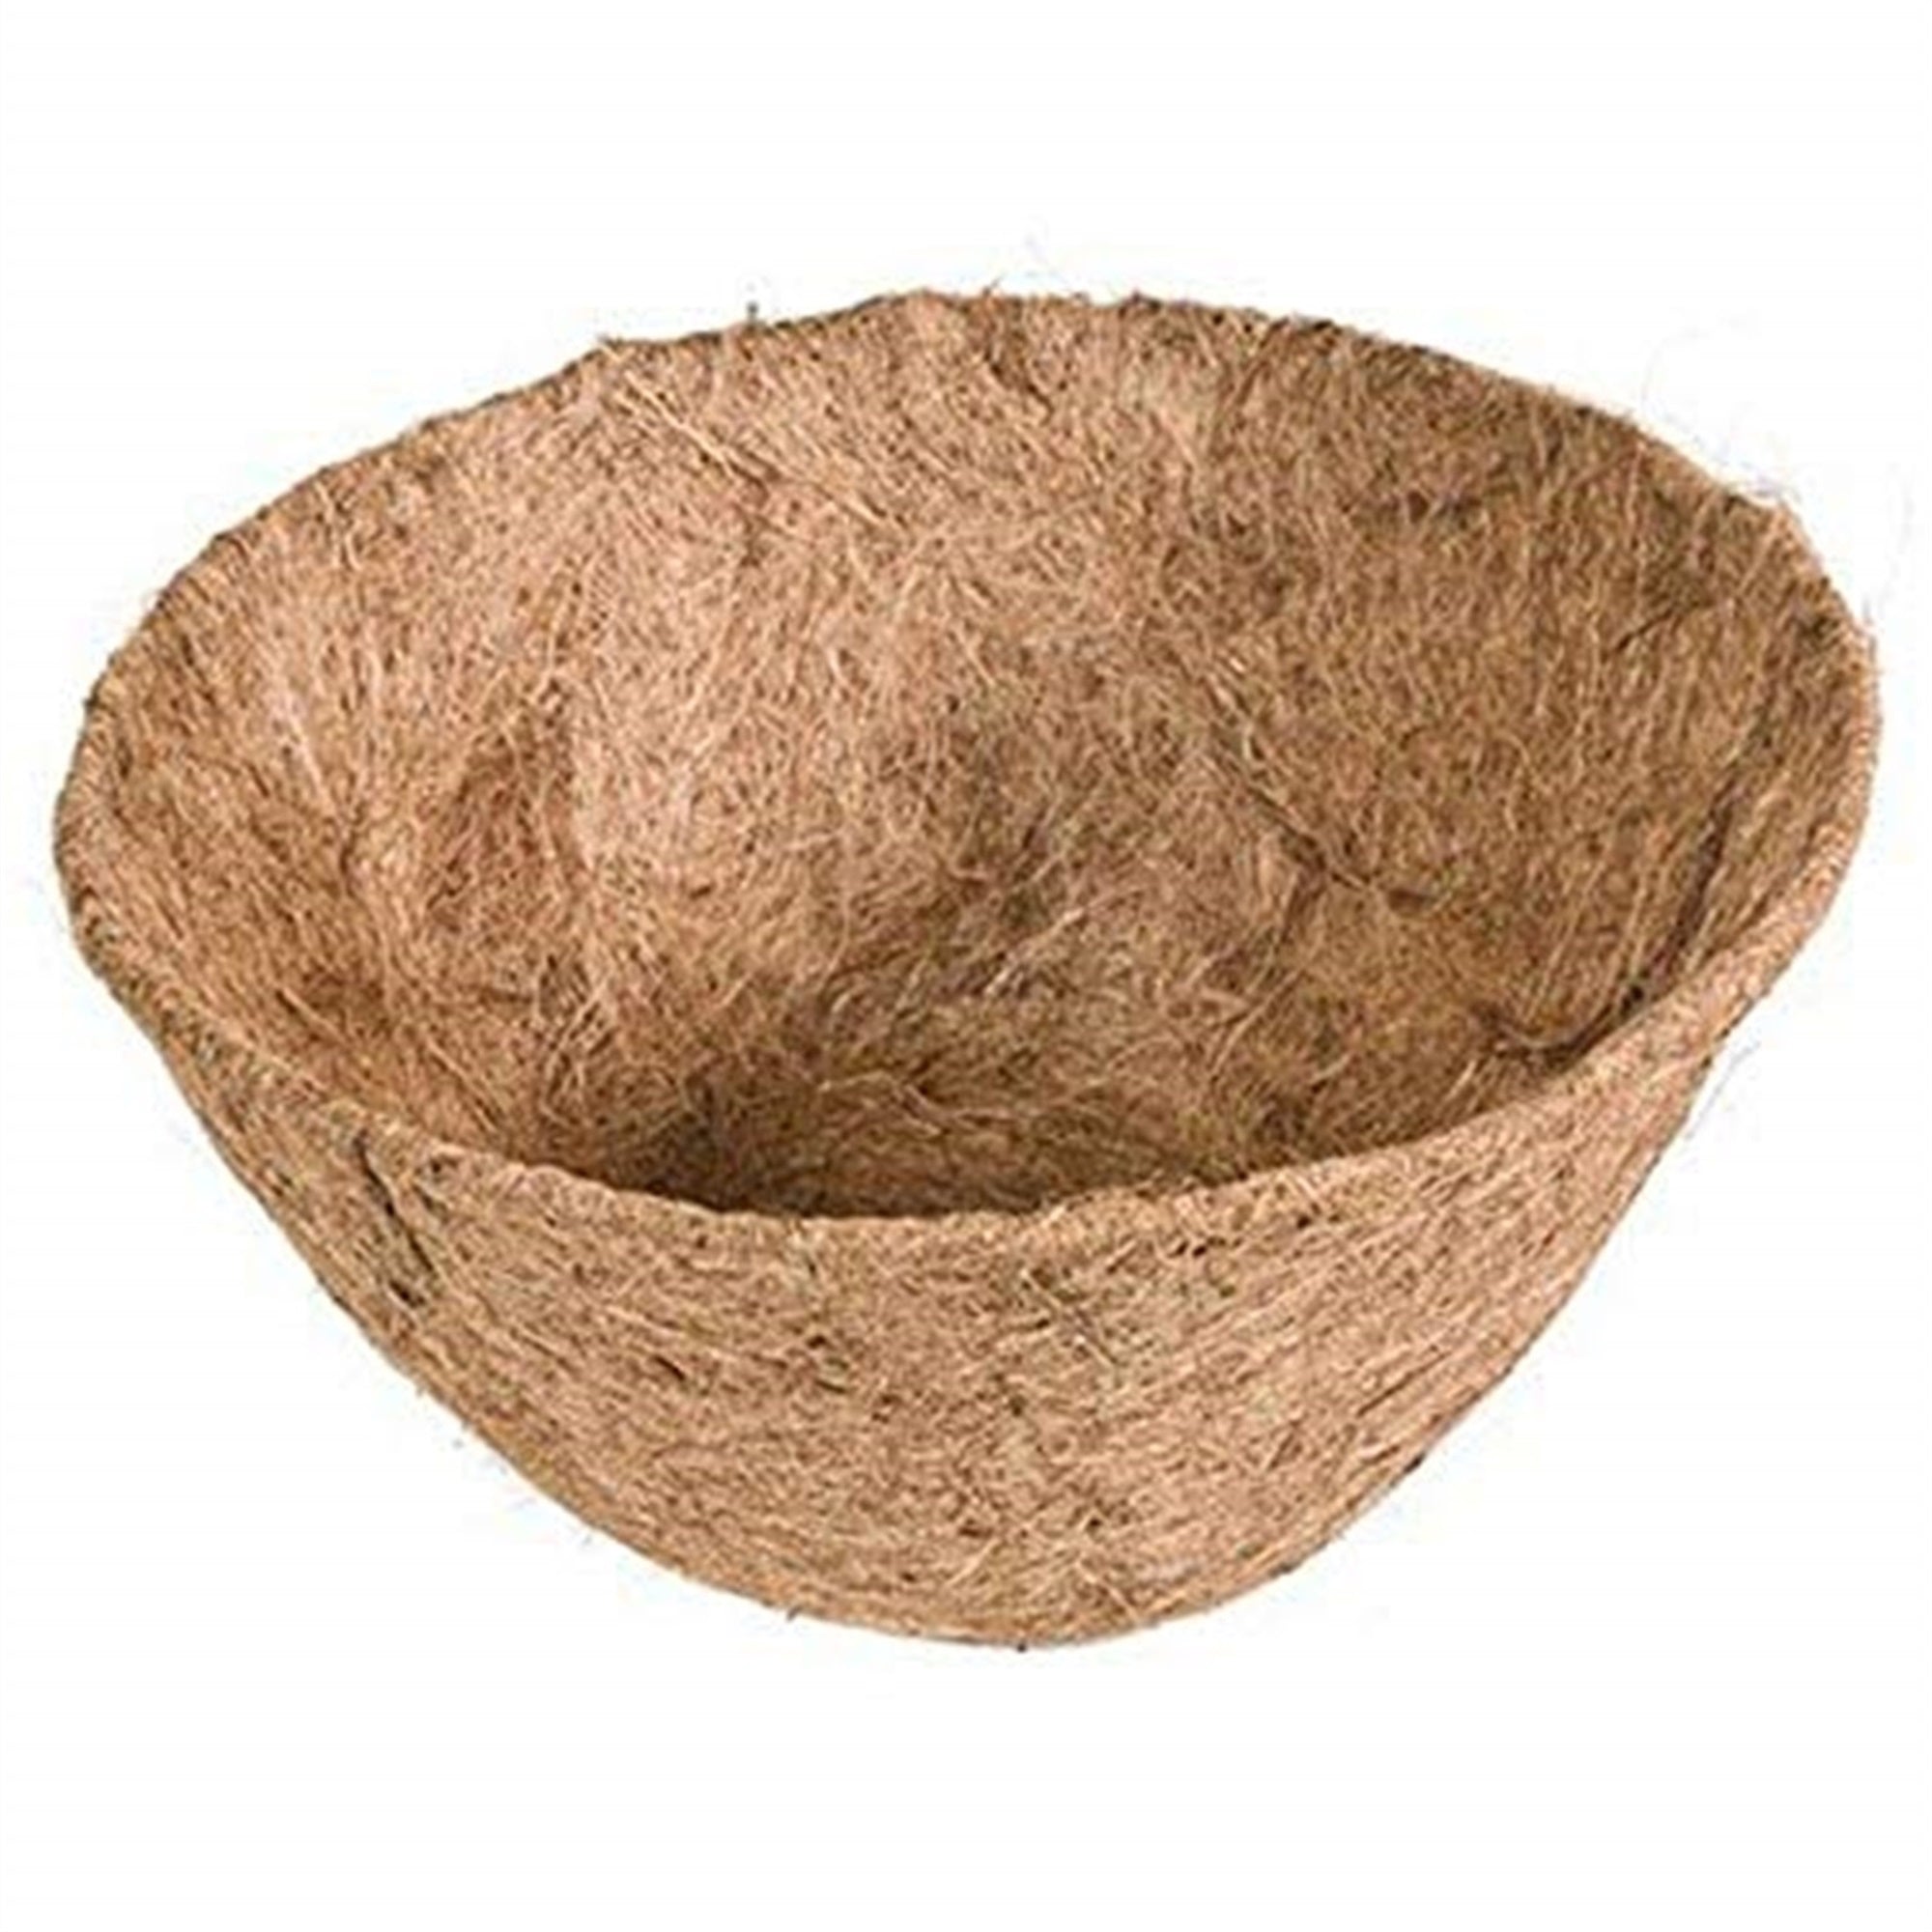 Panacea Products 14-Inch Round Coco Fiber Liner, 1, Brown